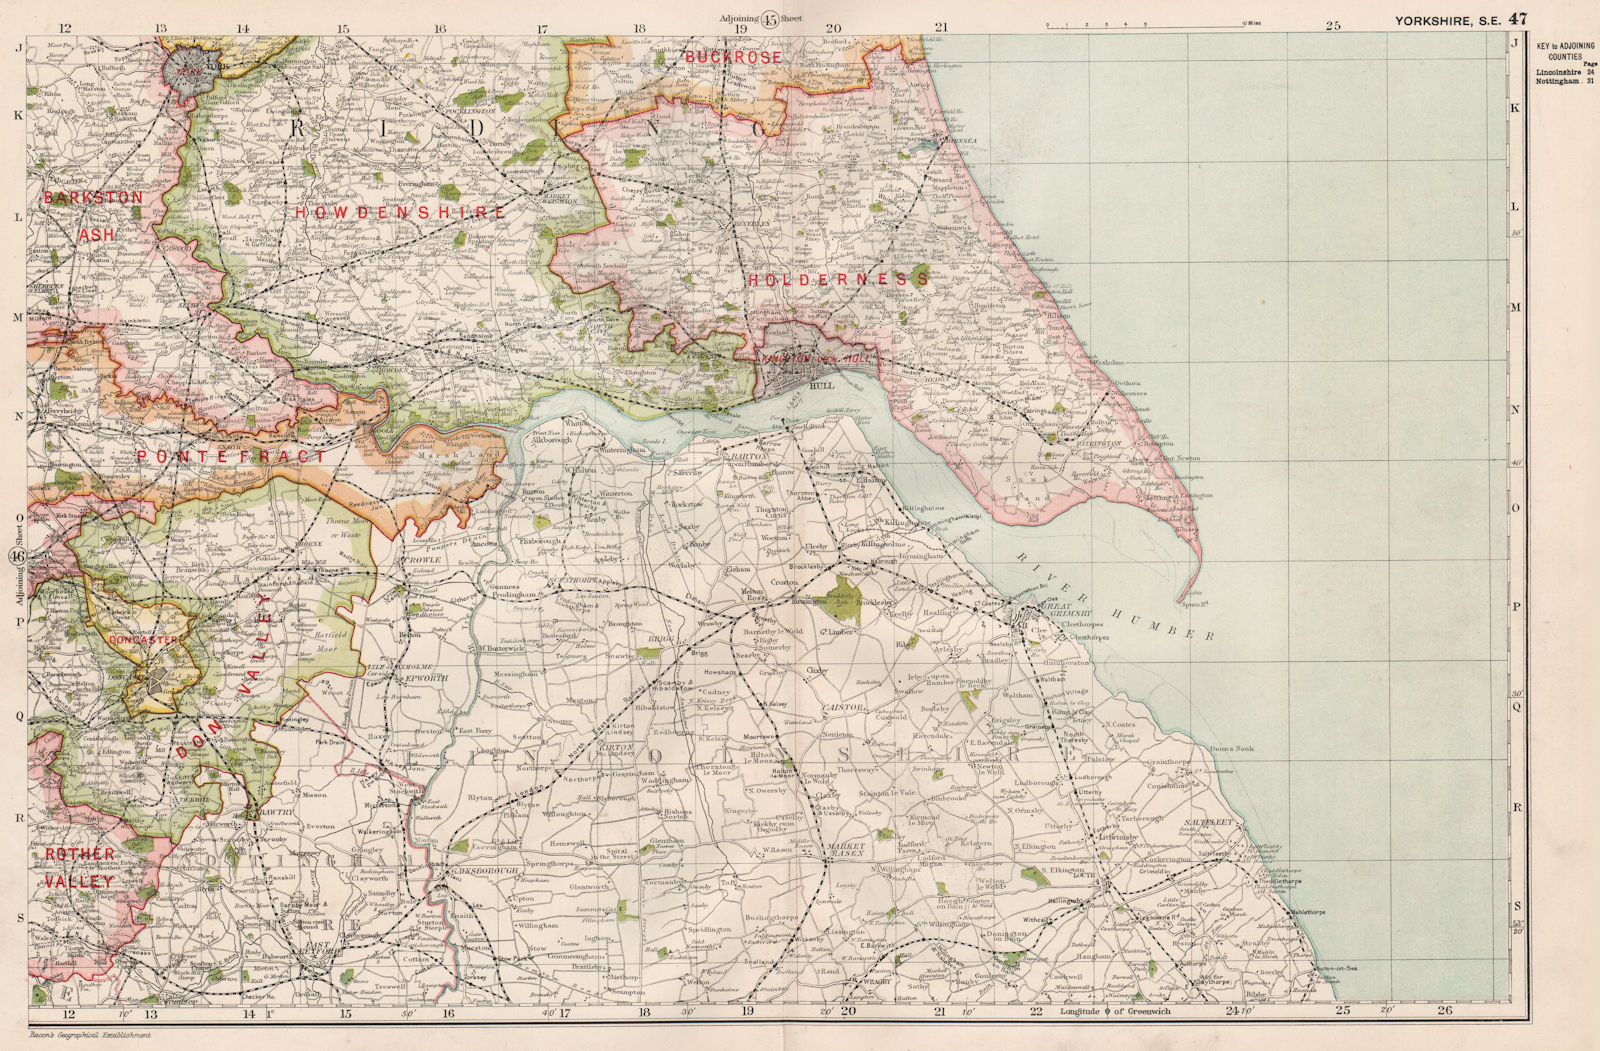 Associate Product YORKSHIRE (SOUTH EAST) . Showing Parliamentary divisions & parks. BACON 1936 map